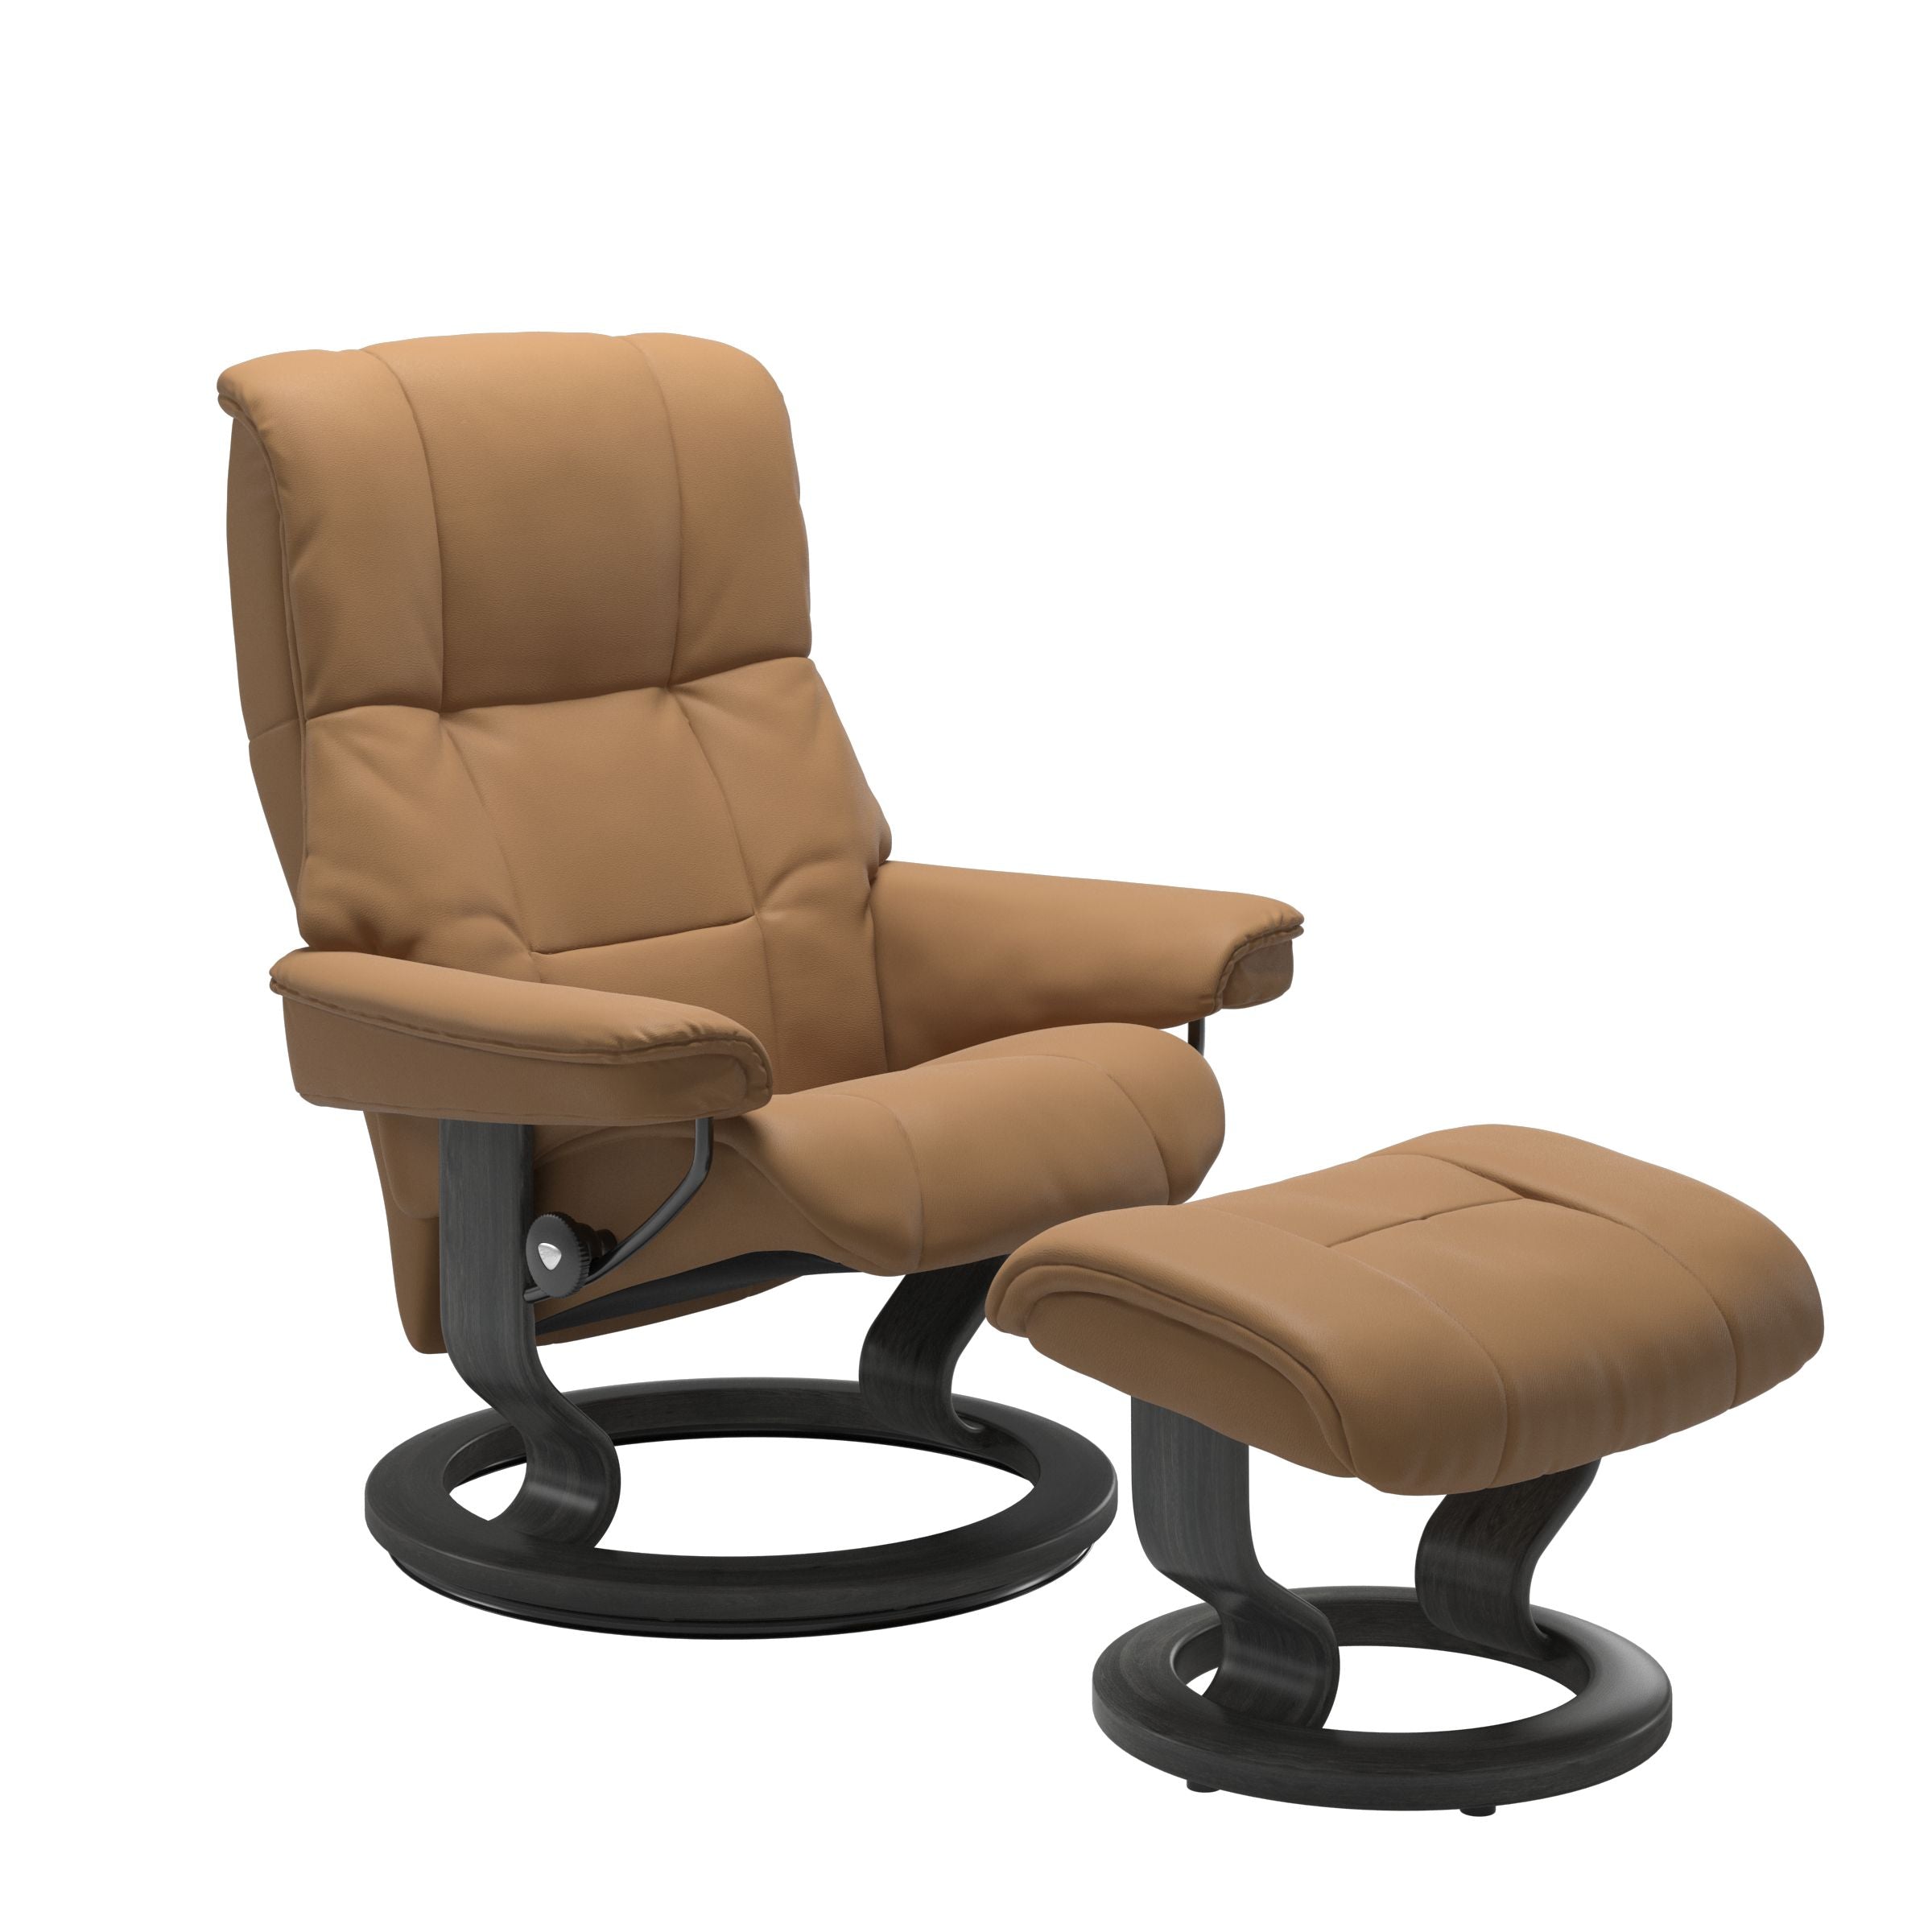 Stressless Mayfair Large Recliner and Ottoman with Classic Base